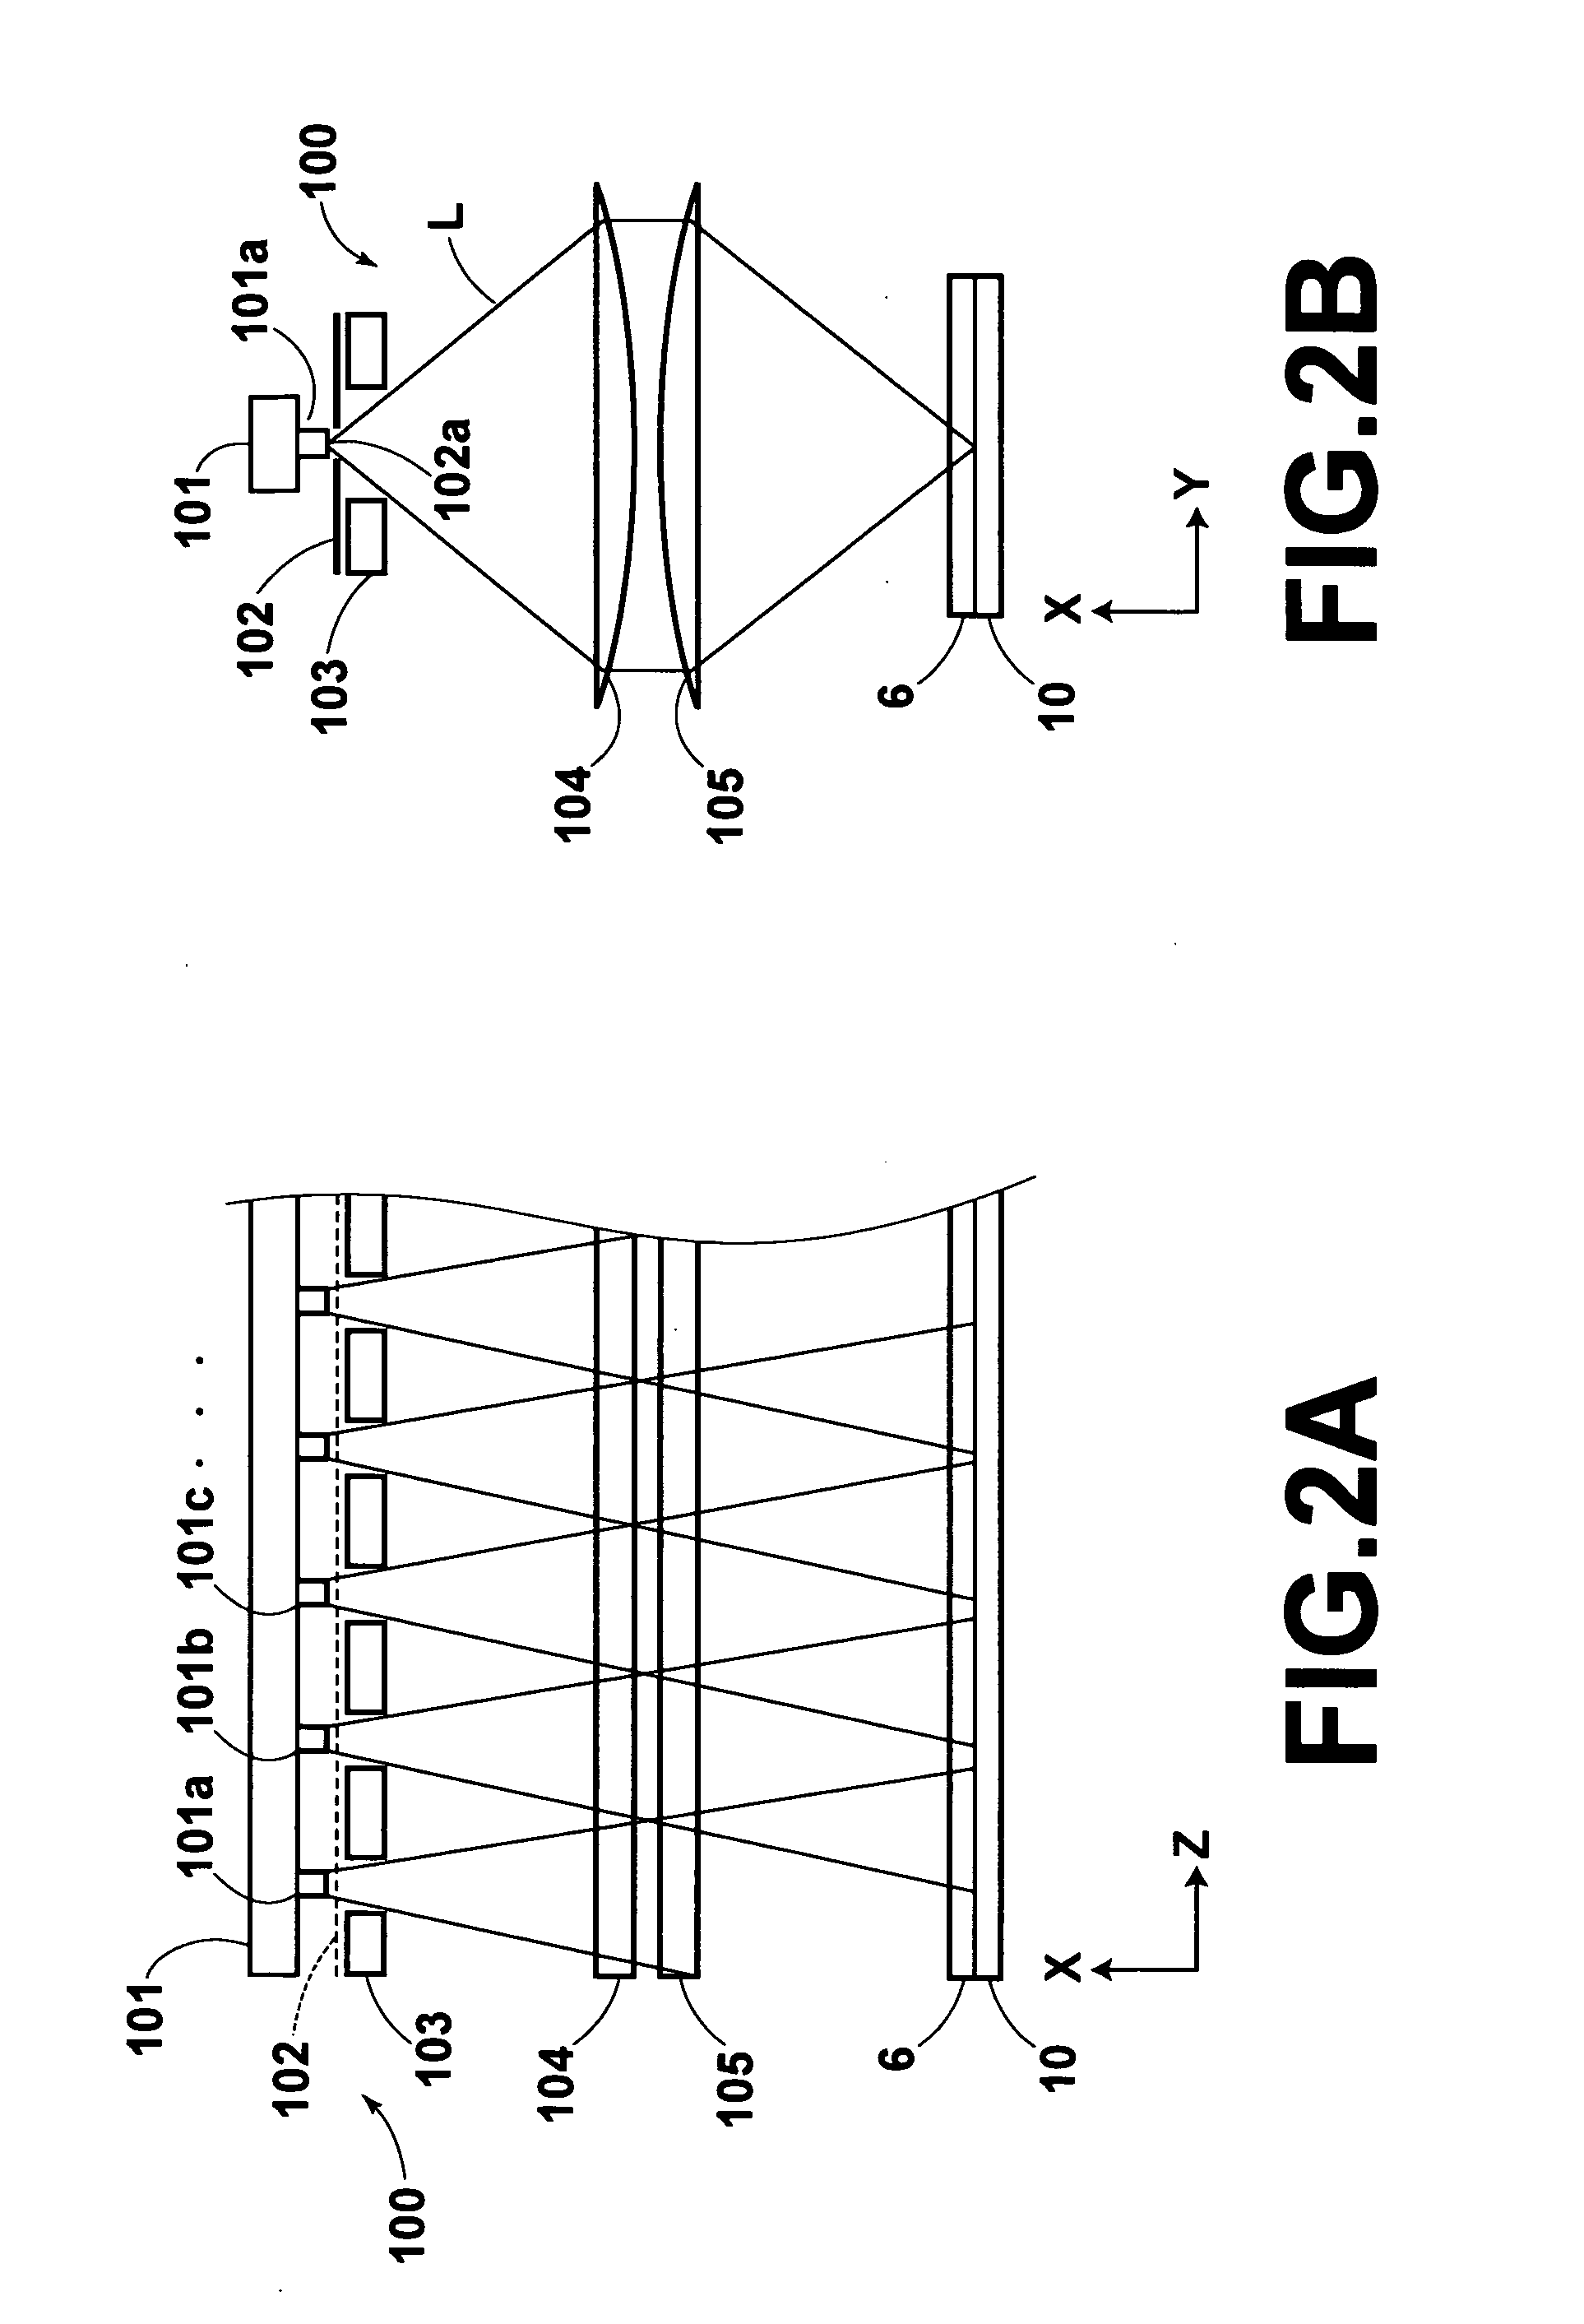 Exposure system and hole array